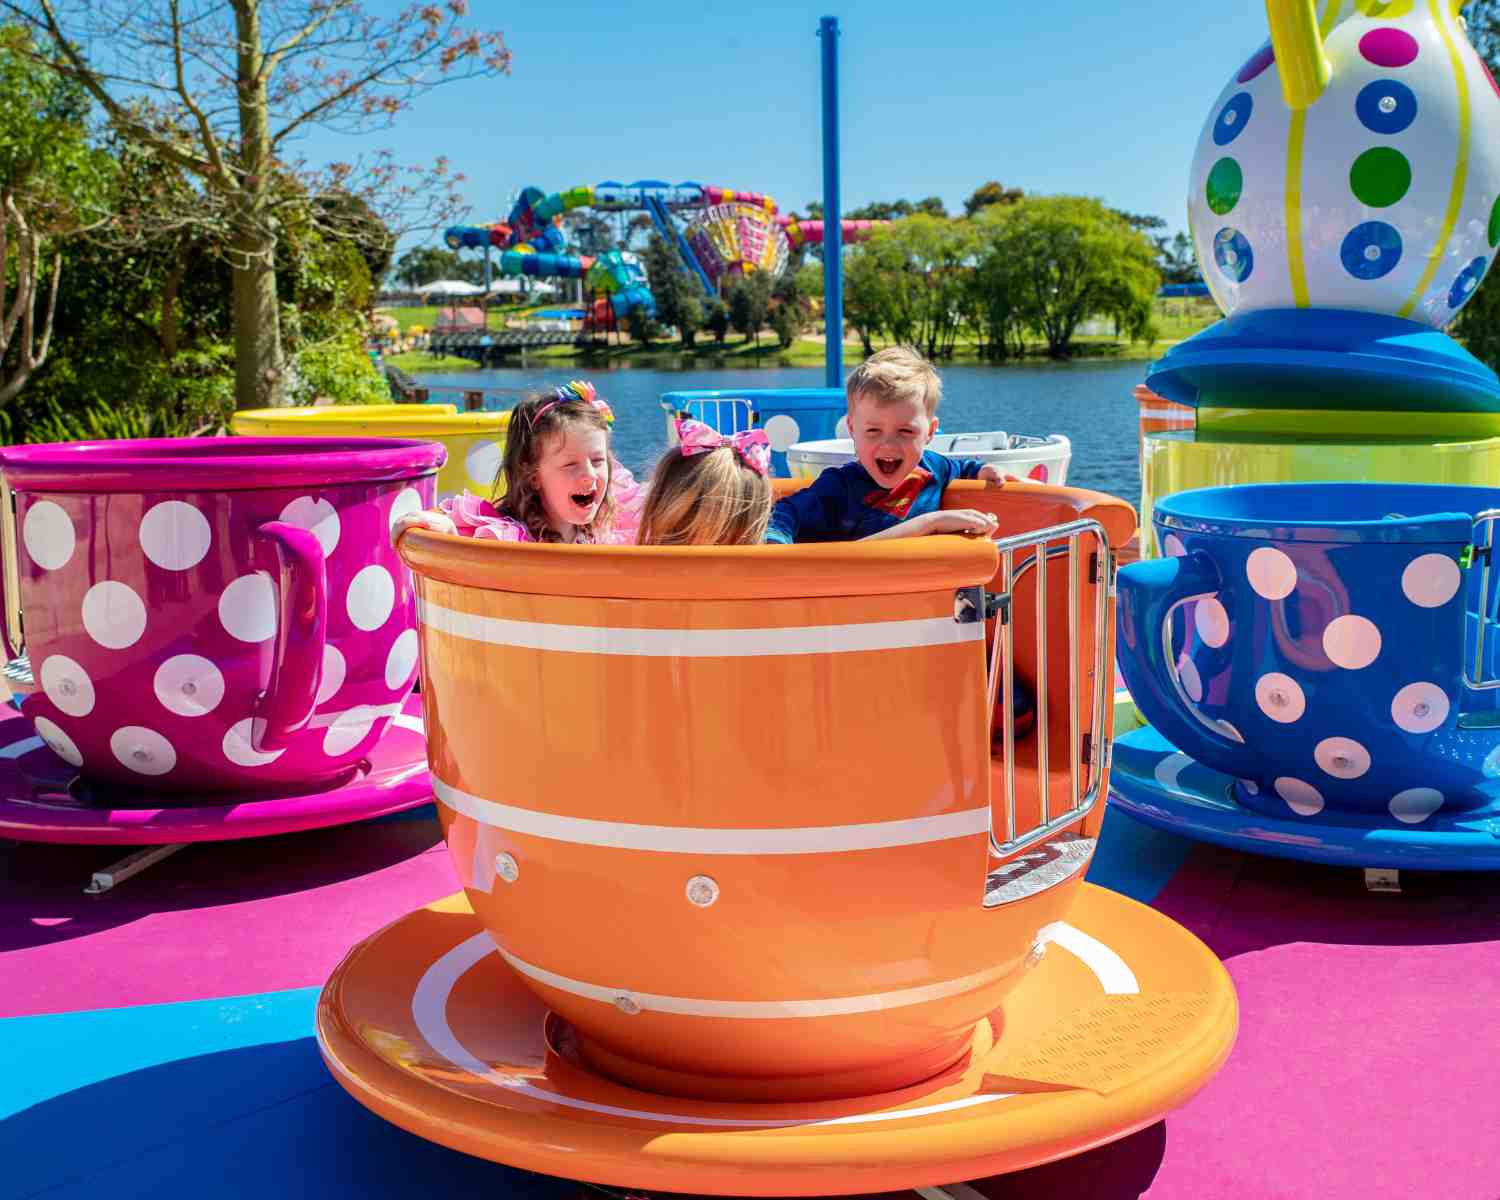 Teacups at Adventure Park Geelong Water Park with kids